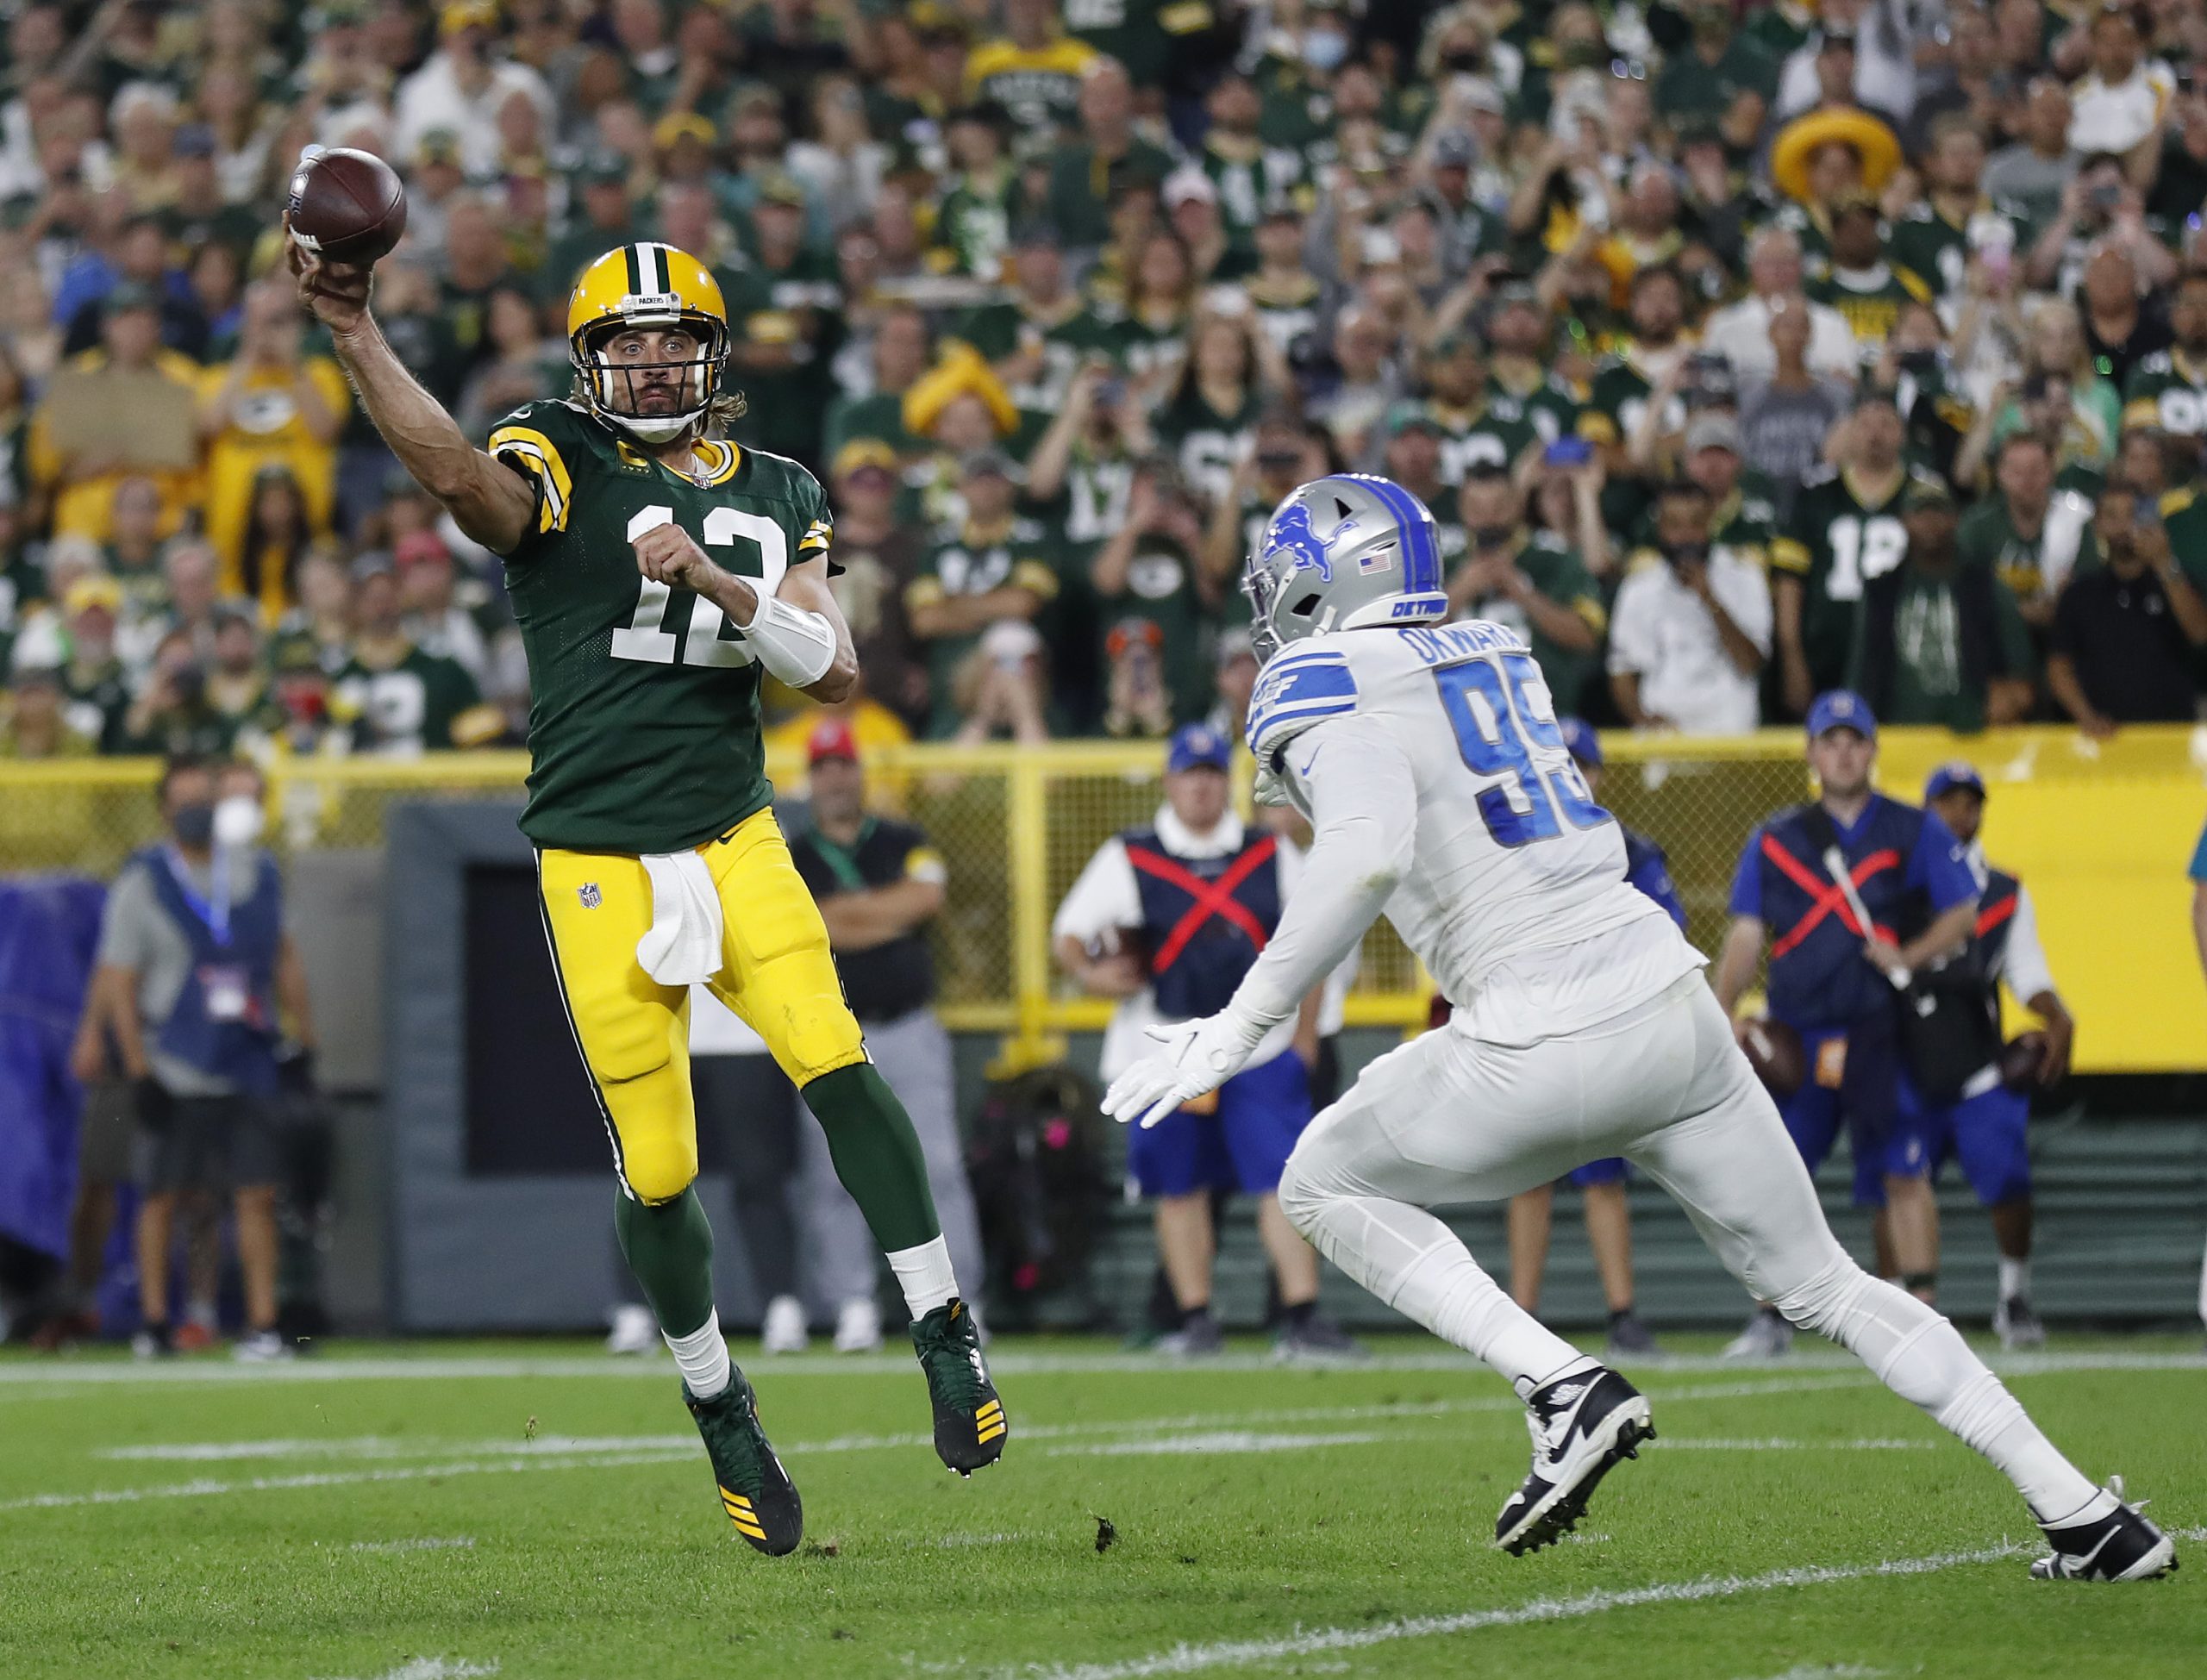 Aaron Rodgers of the Green Bay Packers throws under pressure.